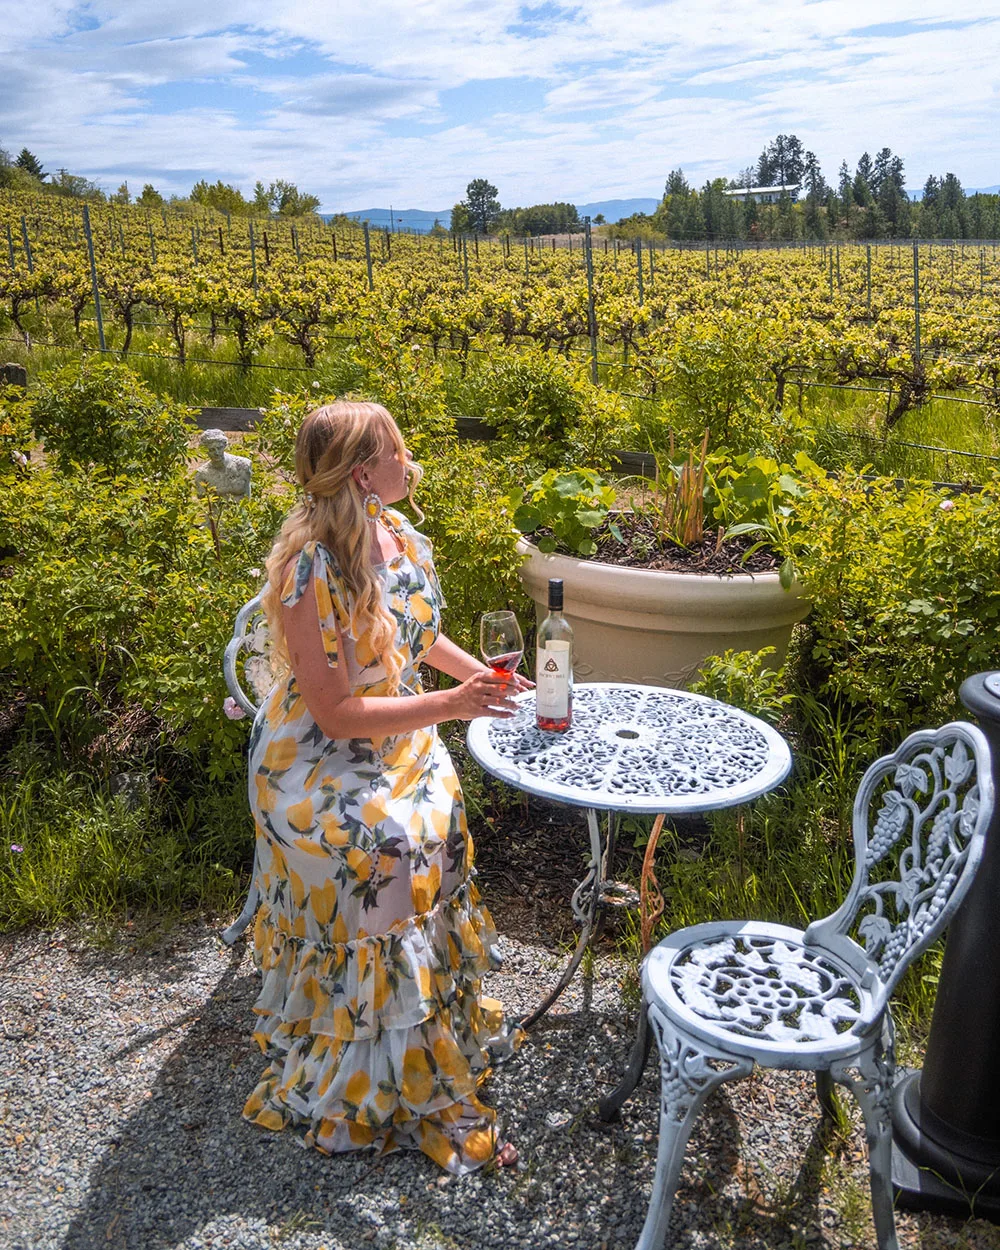 Looking for the best wineries in Kelowna for lunch? This guide is for you! Here's a list of the best Kelowna wineries with restaurants to enjoy an amazing lunch with wine in the sun. Pictured here: Ancient Hill Winery